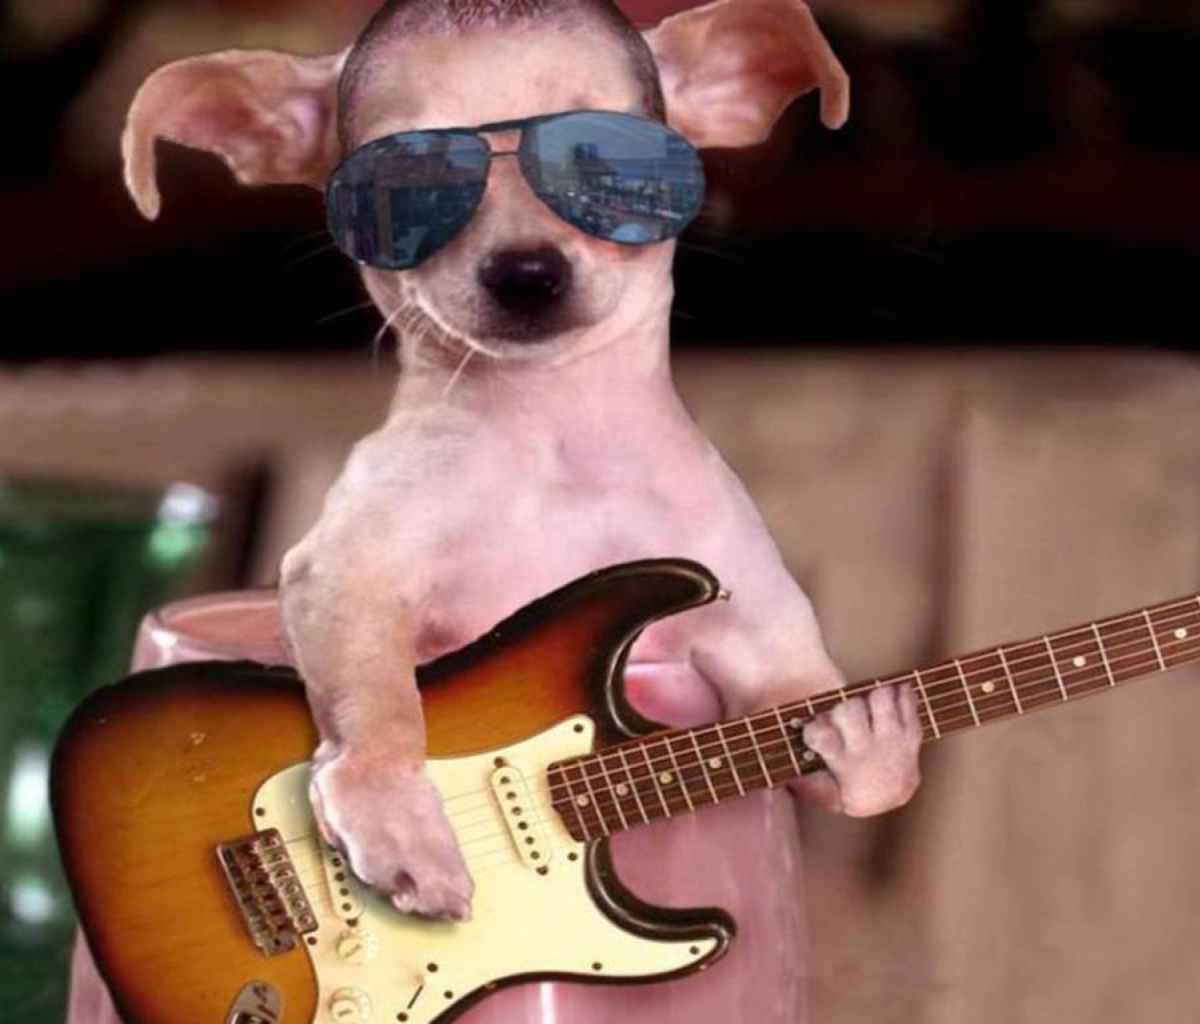 Funny Dog With Guitar wallpaper 1200x1024